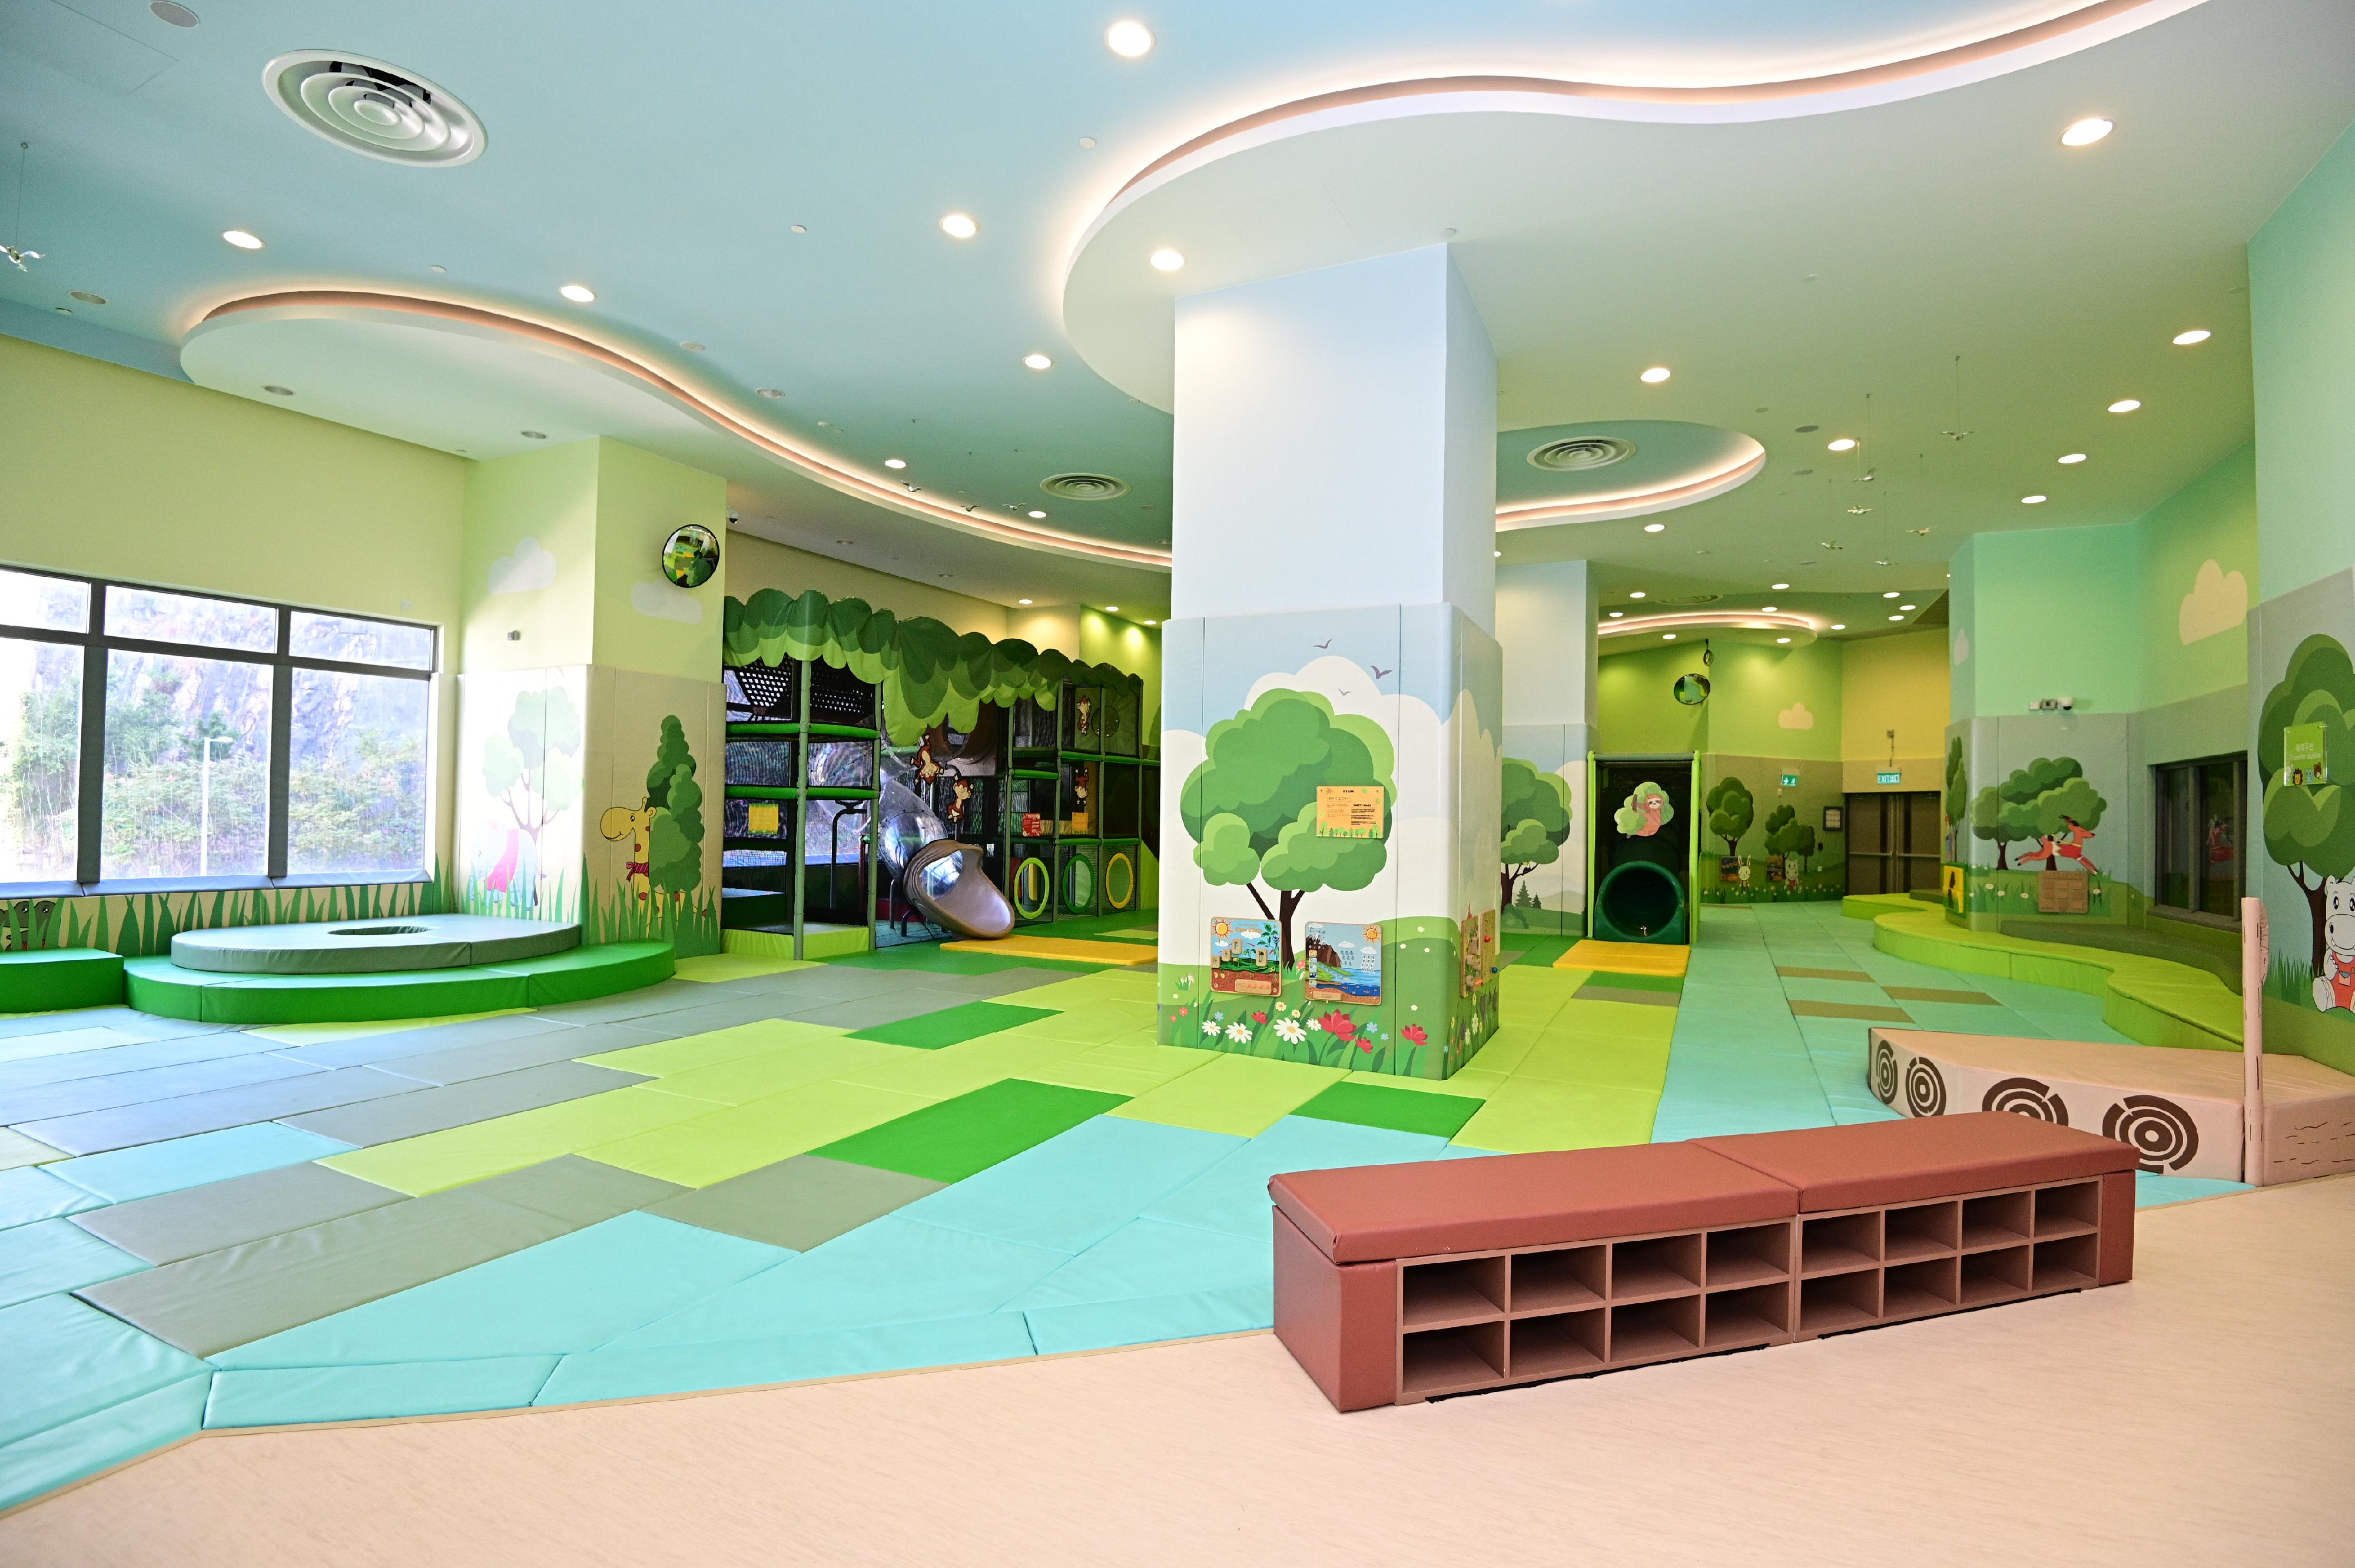 Choi Wing Road Sports Centre, managed by the Leisure and Cultural Services Department, will open for public use on December 29 (Wednesday). Located in Kwun Tong District, it provides a wide range of leisure and sports facilities. Photo shows the children's play room.